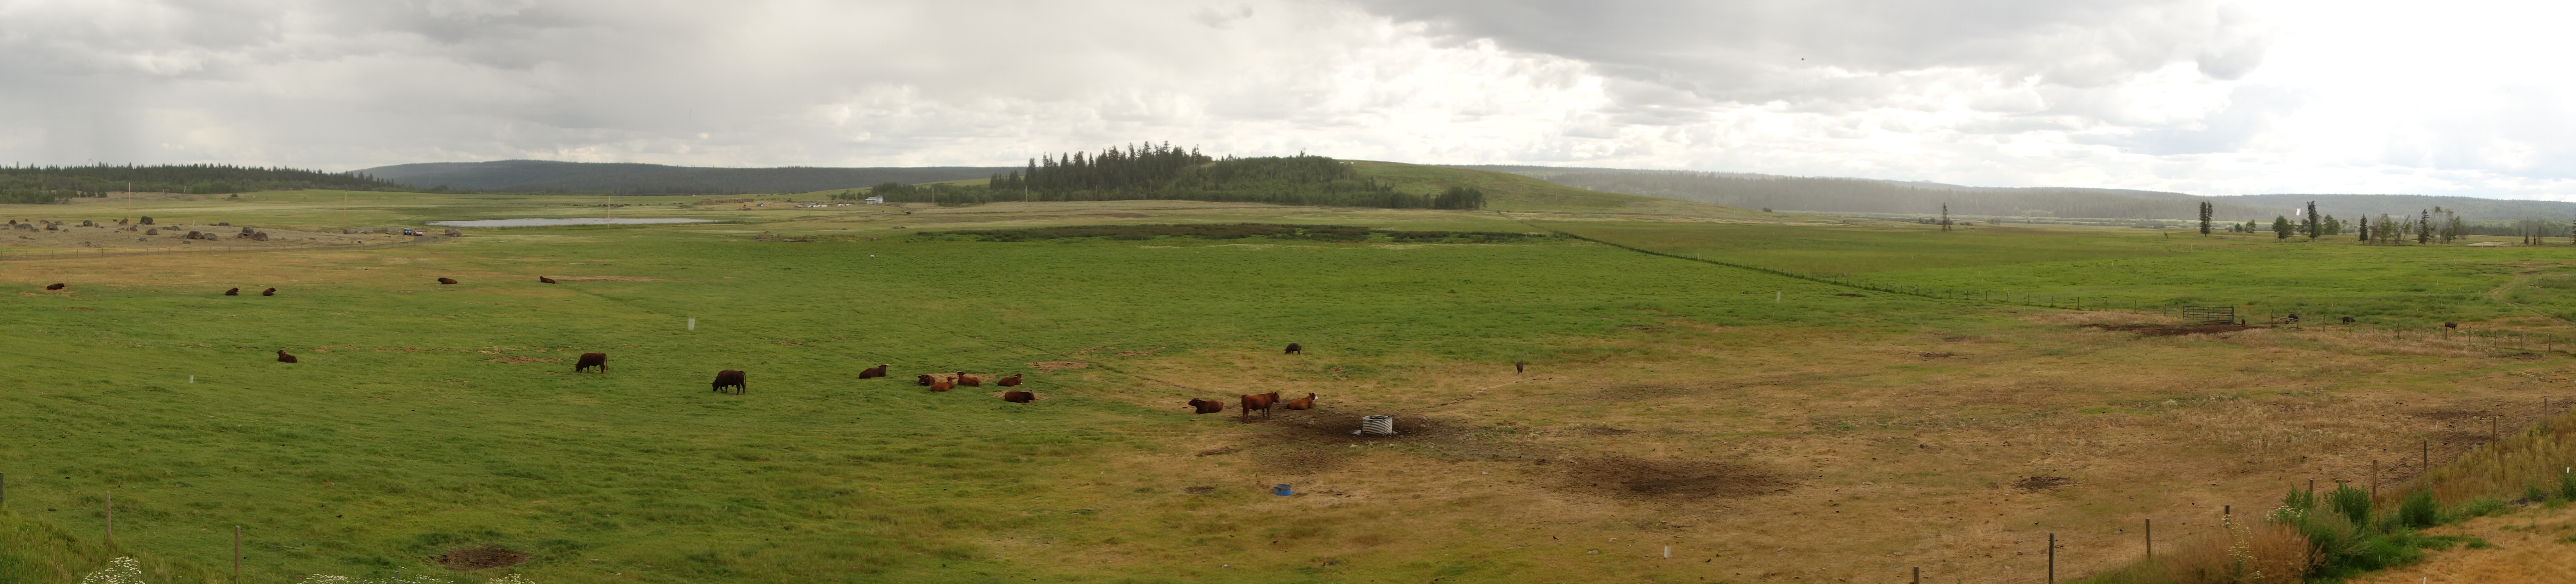 WWOOF-Ranch in Redstone BC